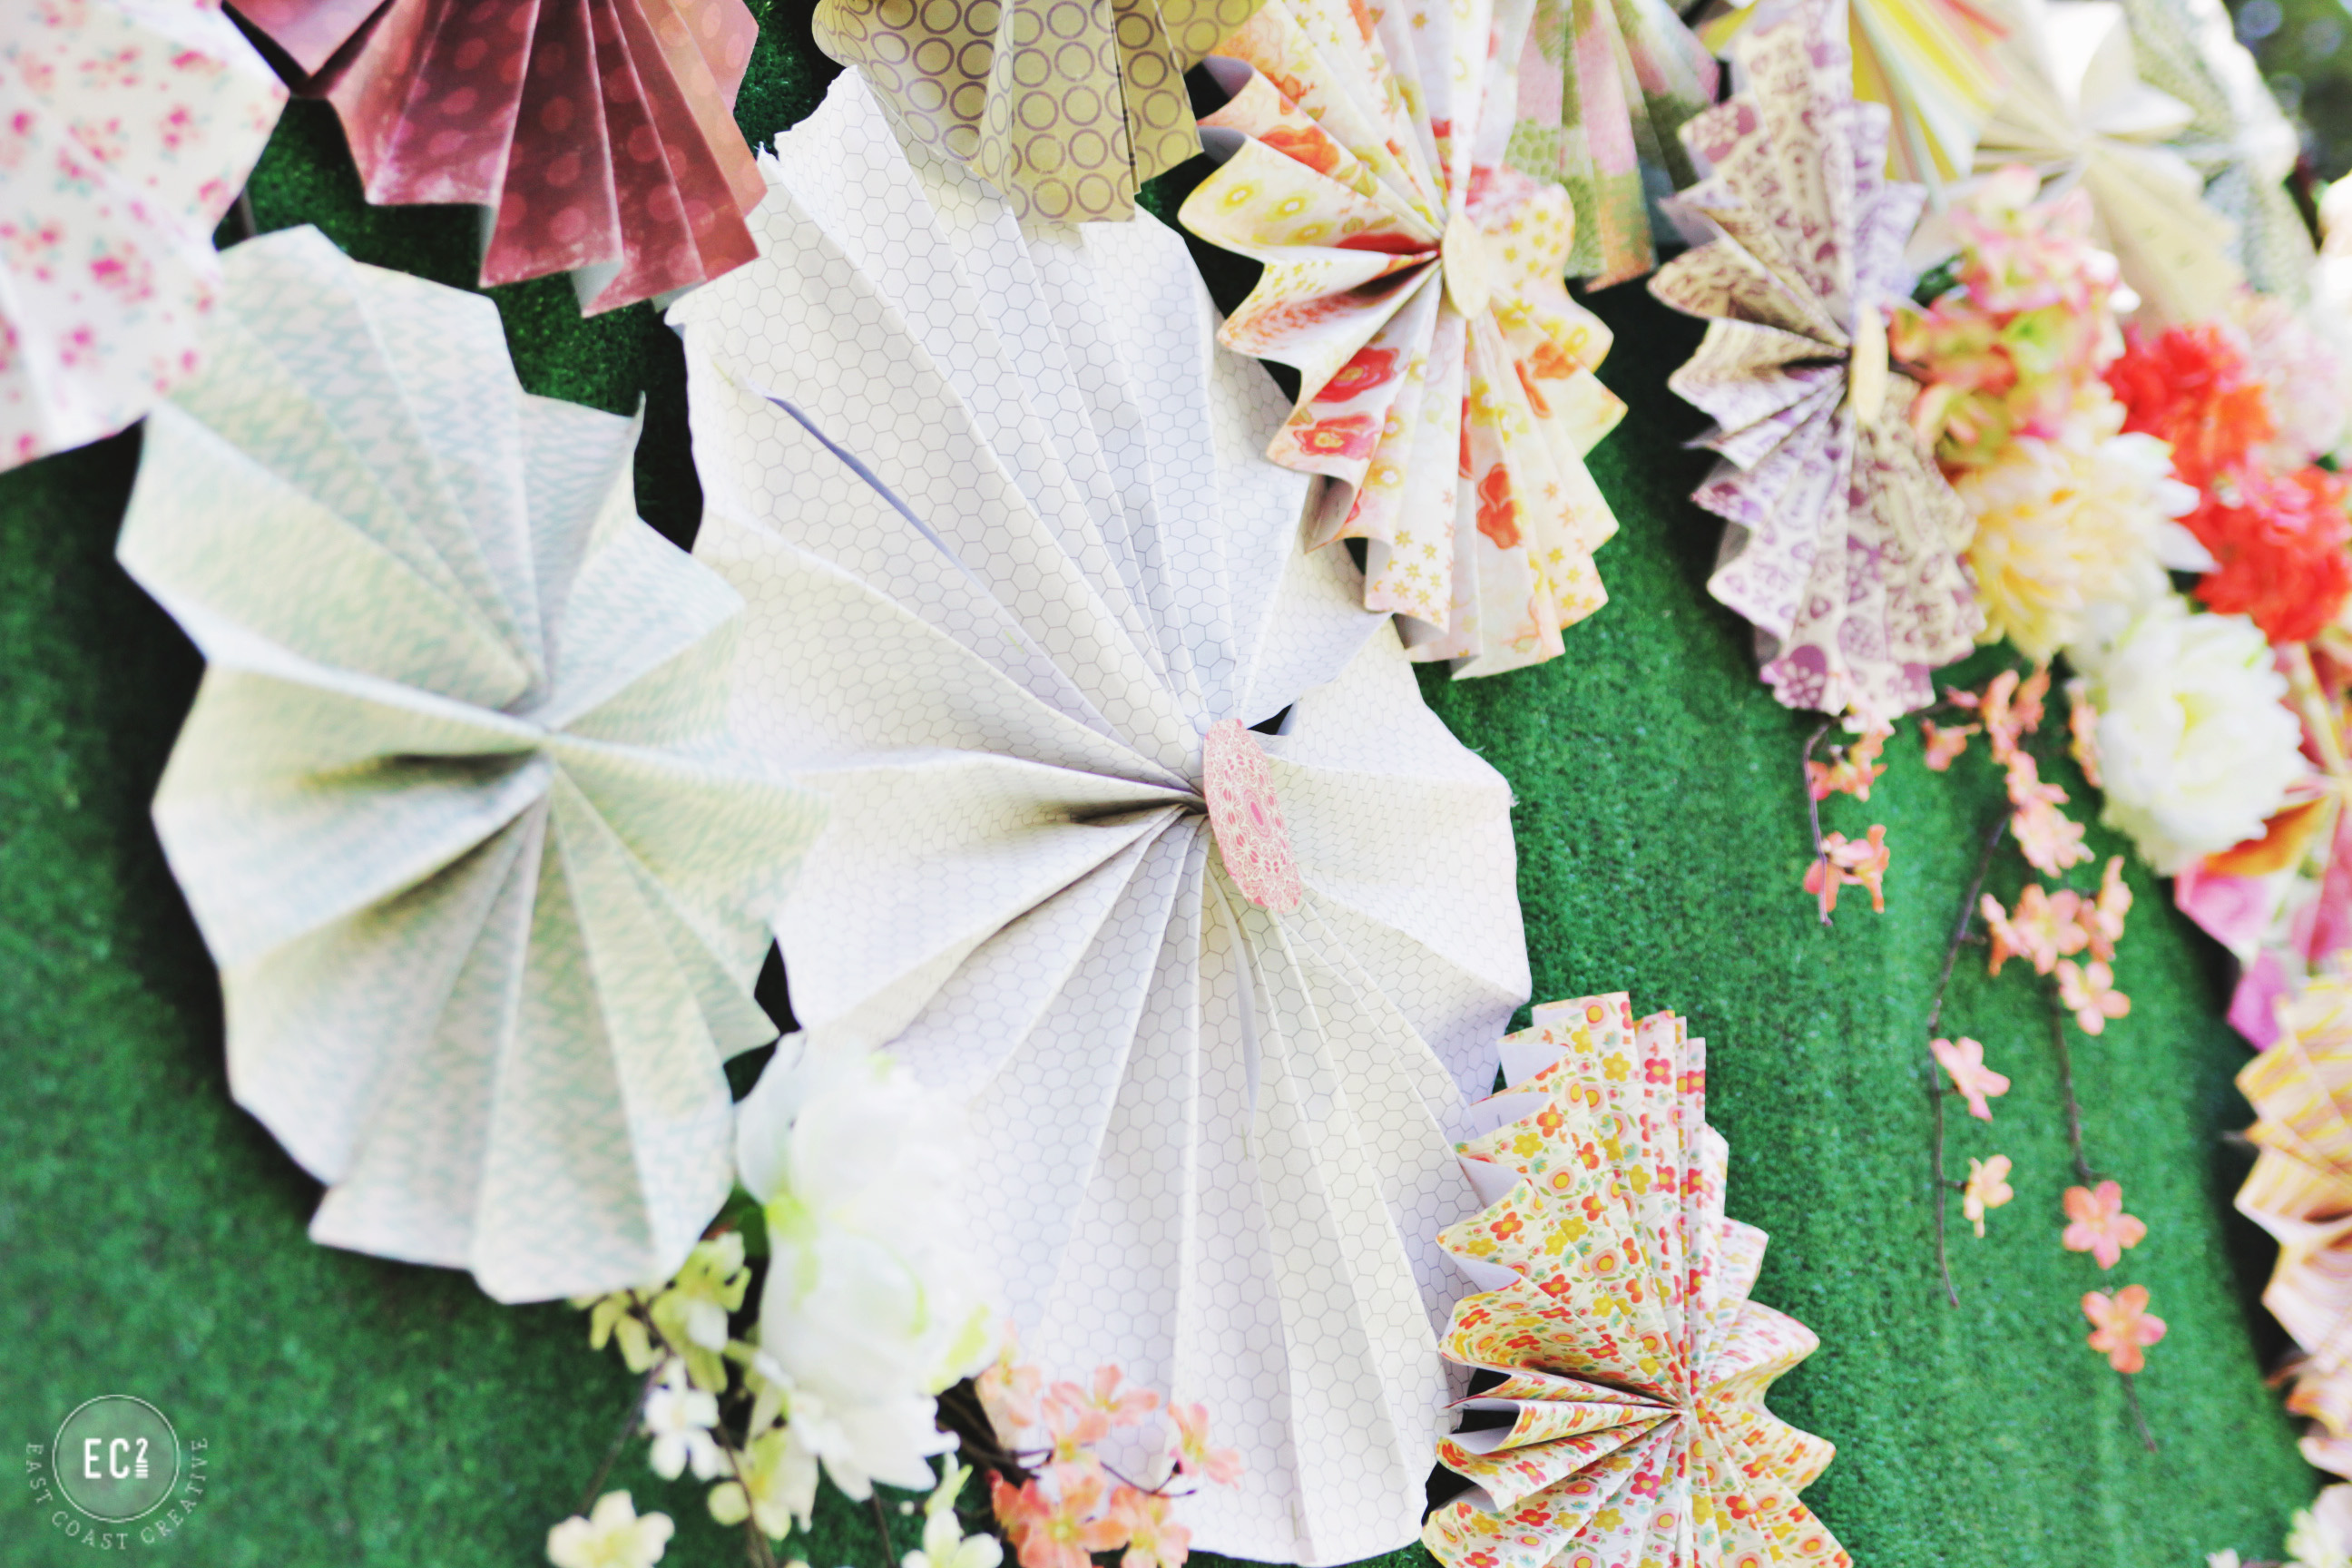 How to make paper pinwheel decorations